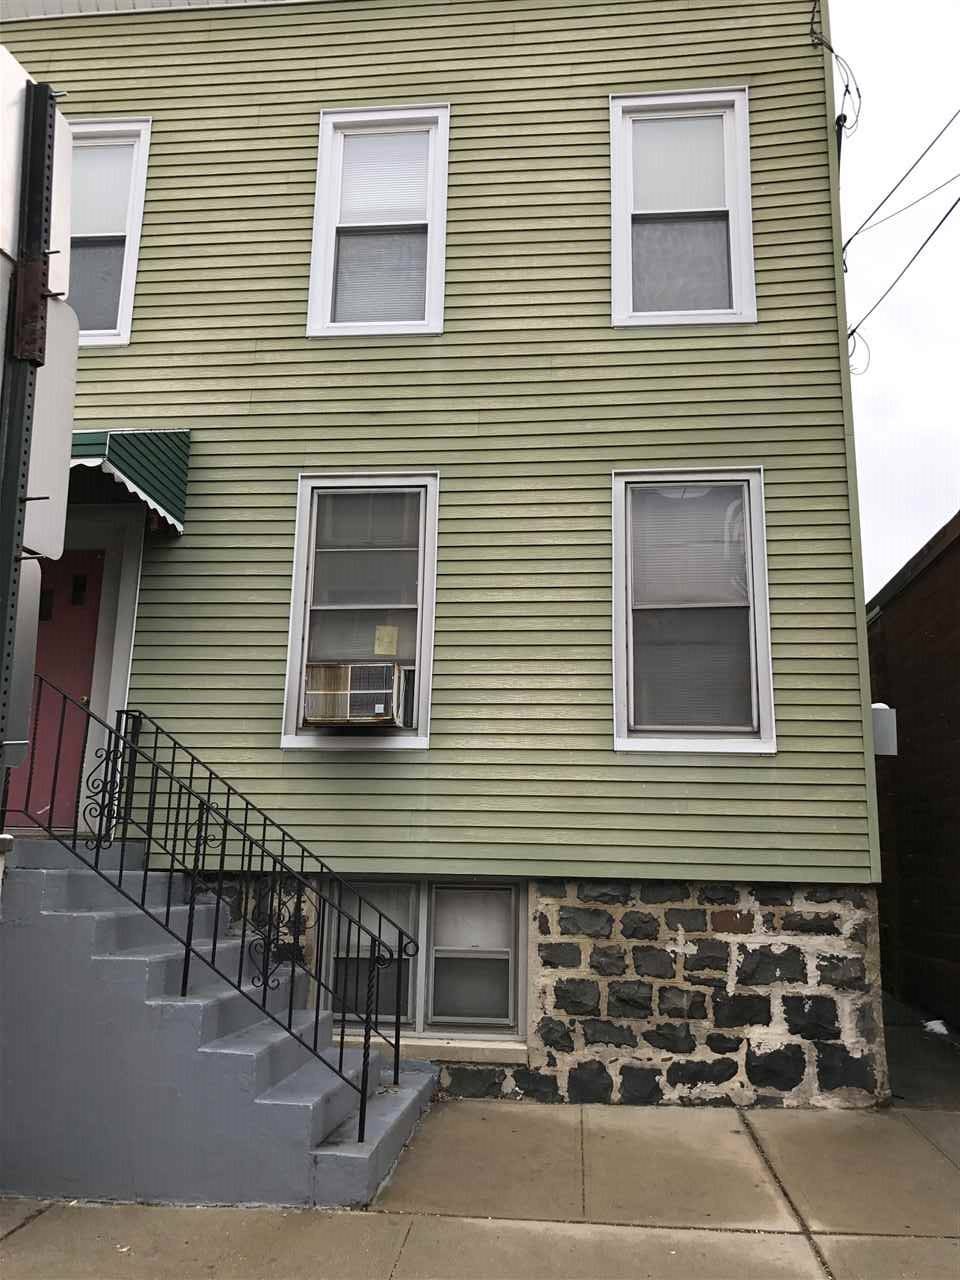 VACANT - 1 BR New Jersey